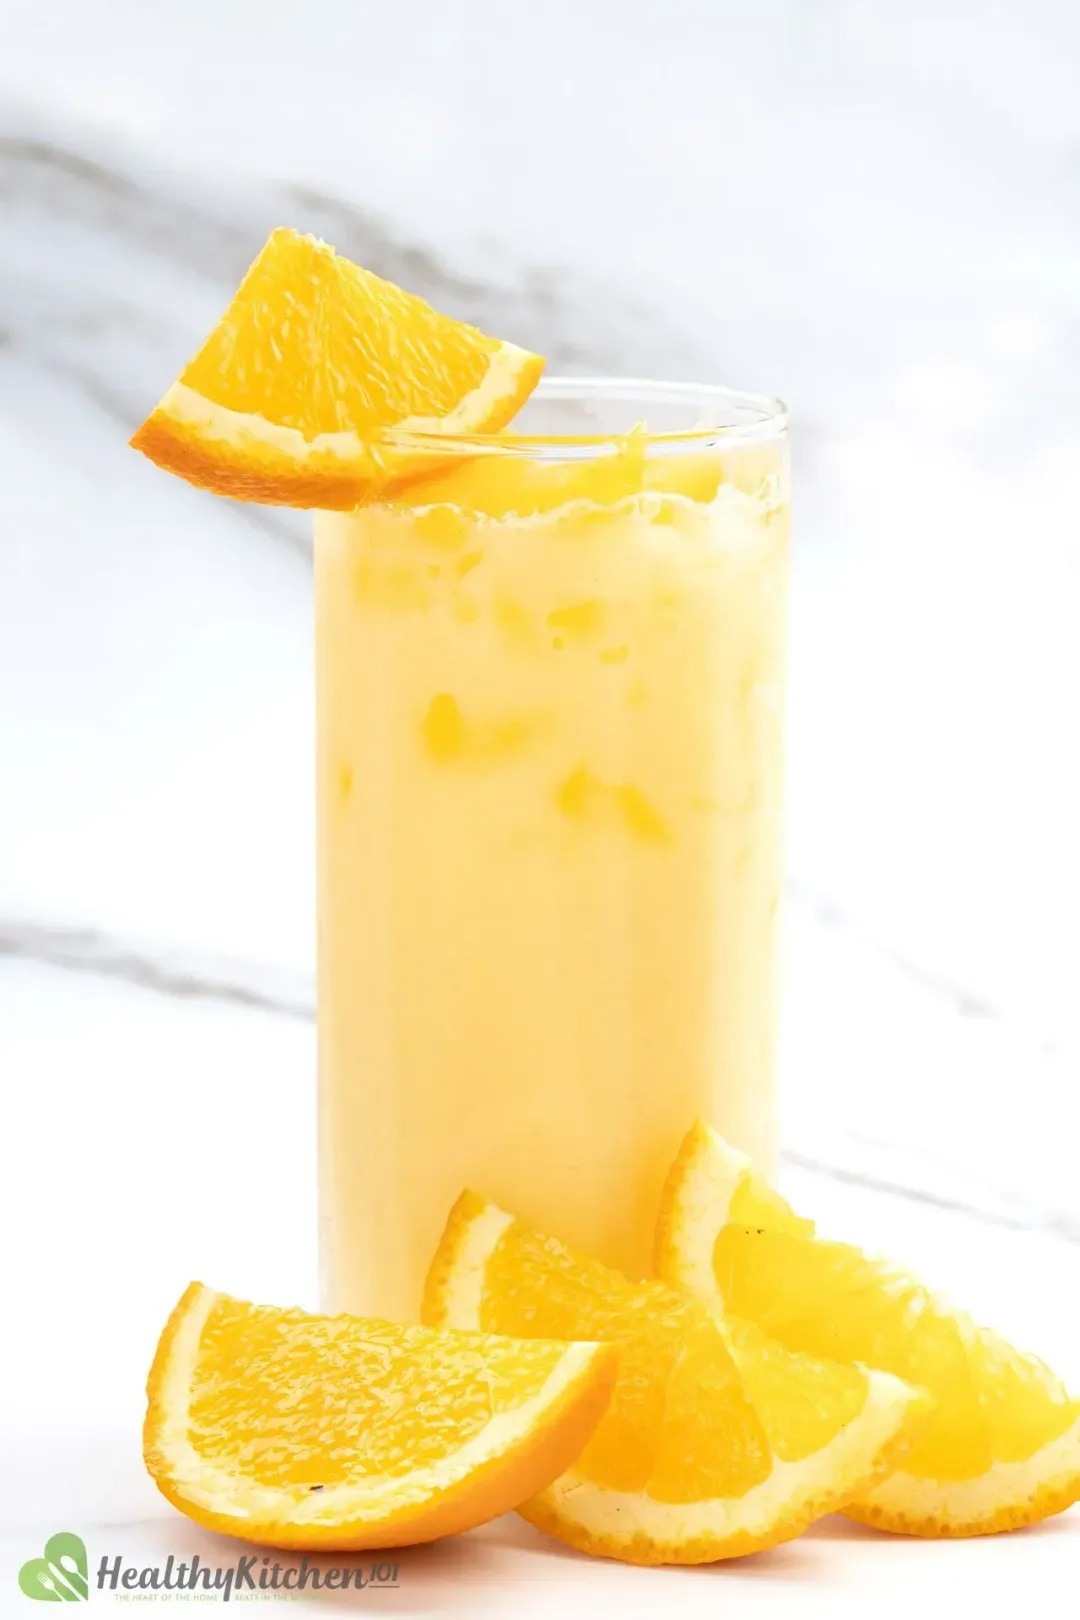 A tall glass of a milk and orange drink, garnished with orange wedges